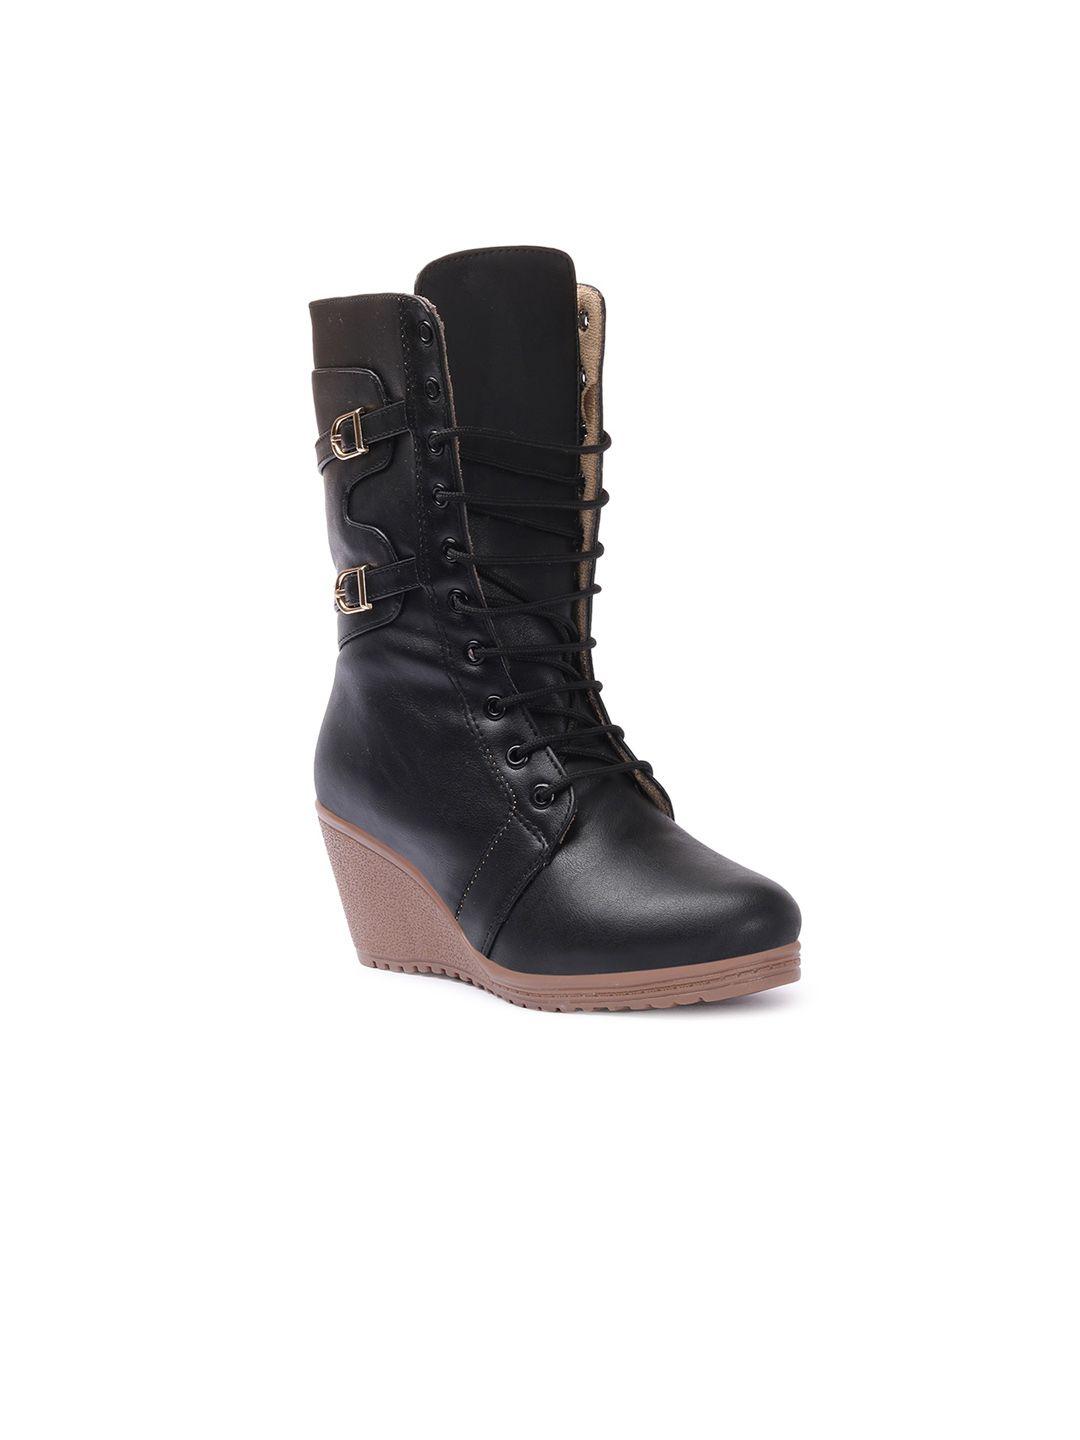 picktoes women black mid-top ankle boots